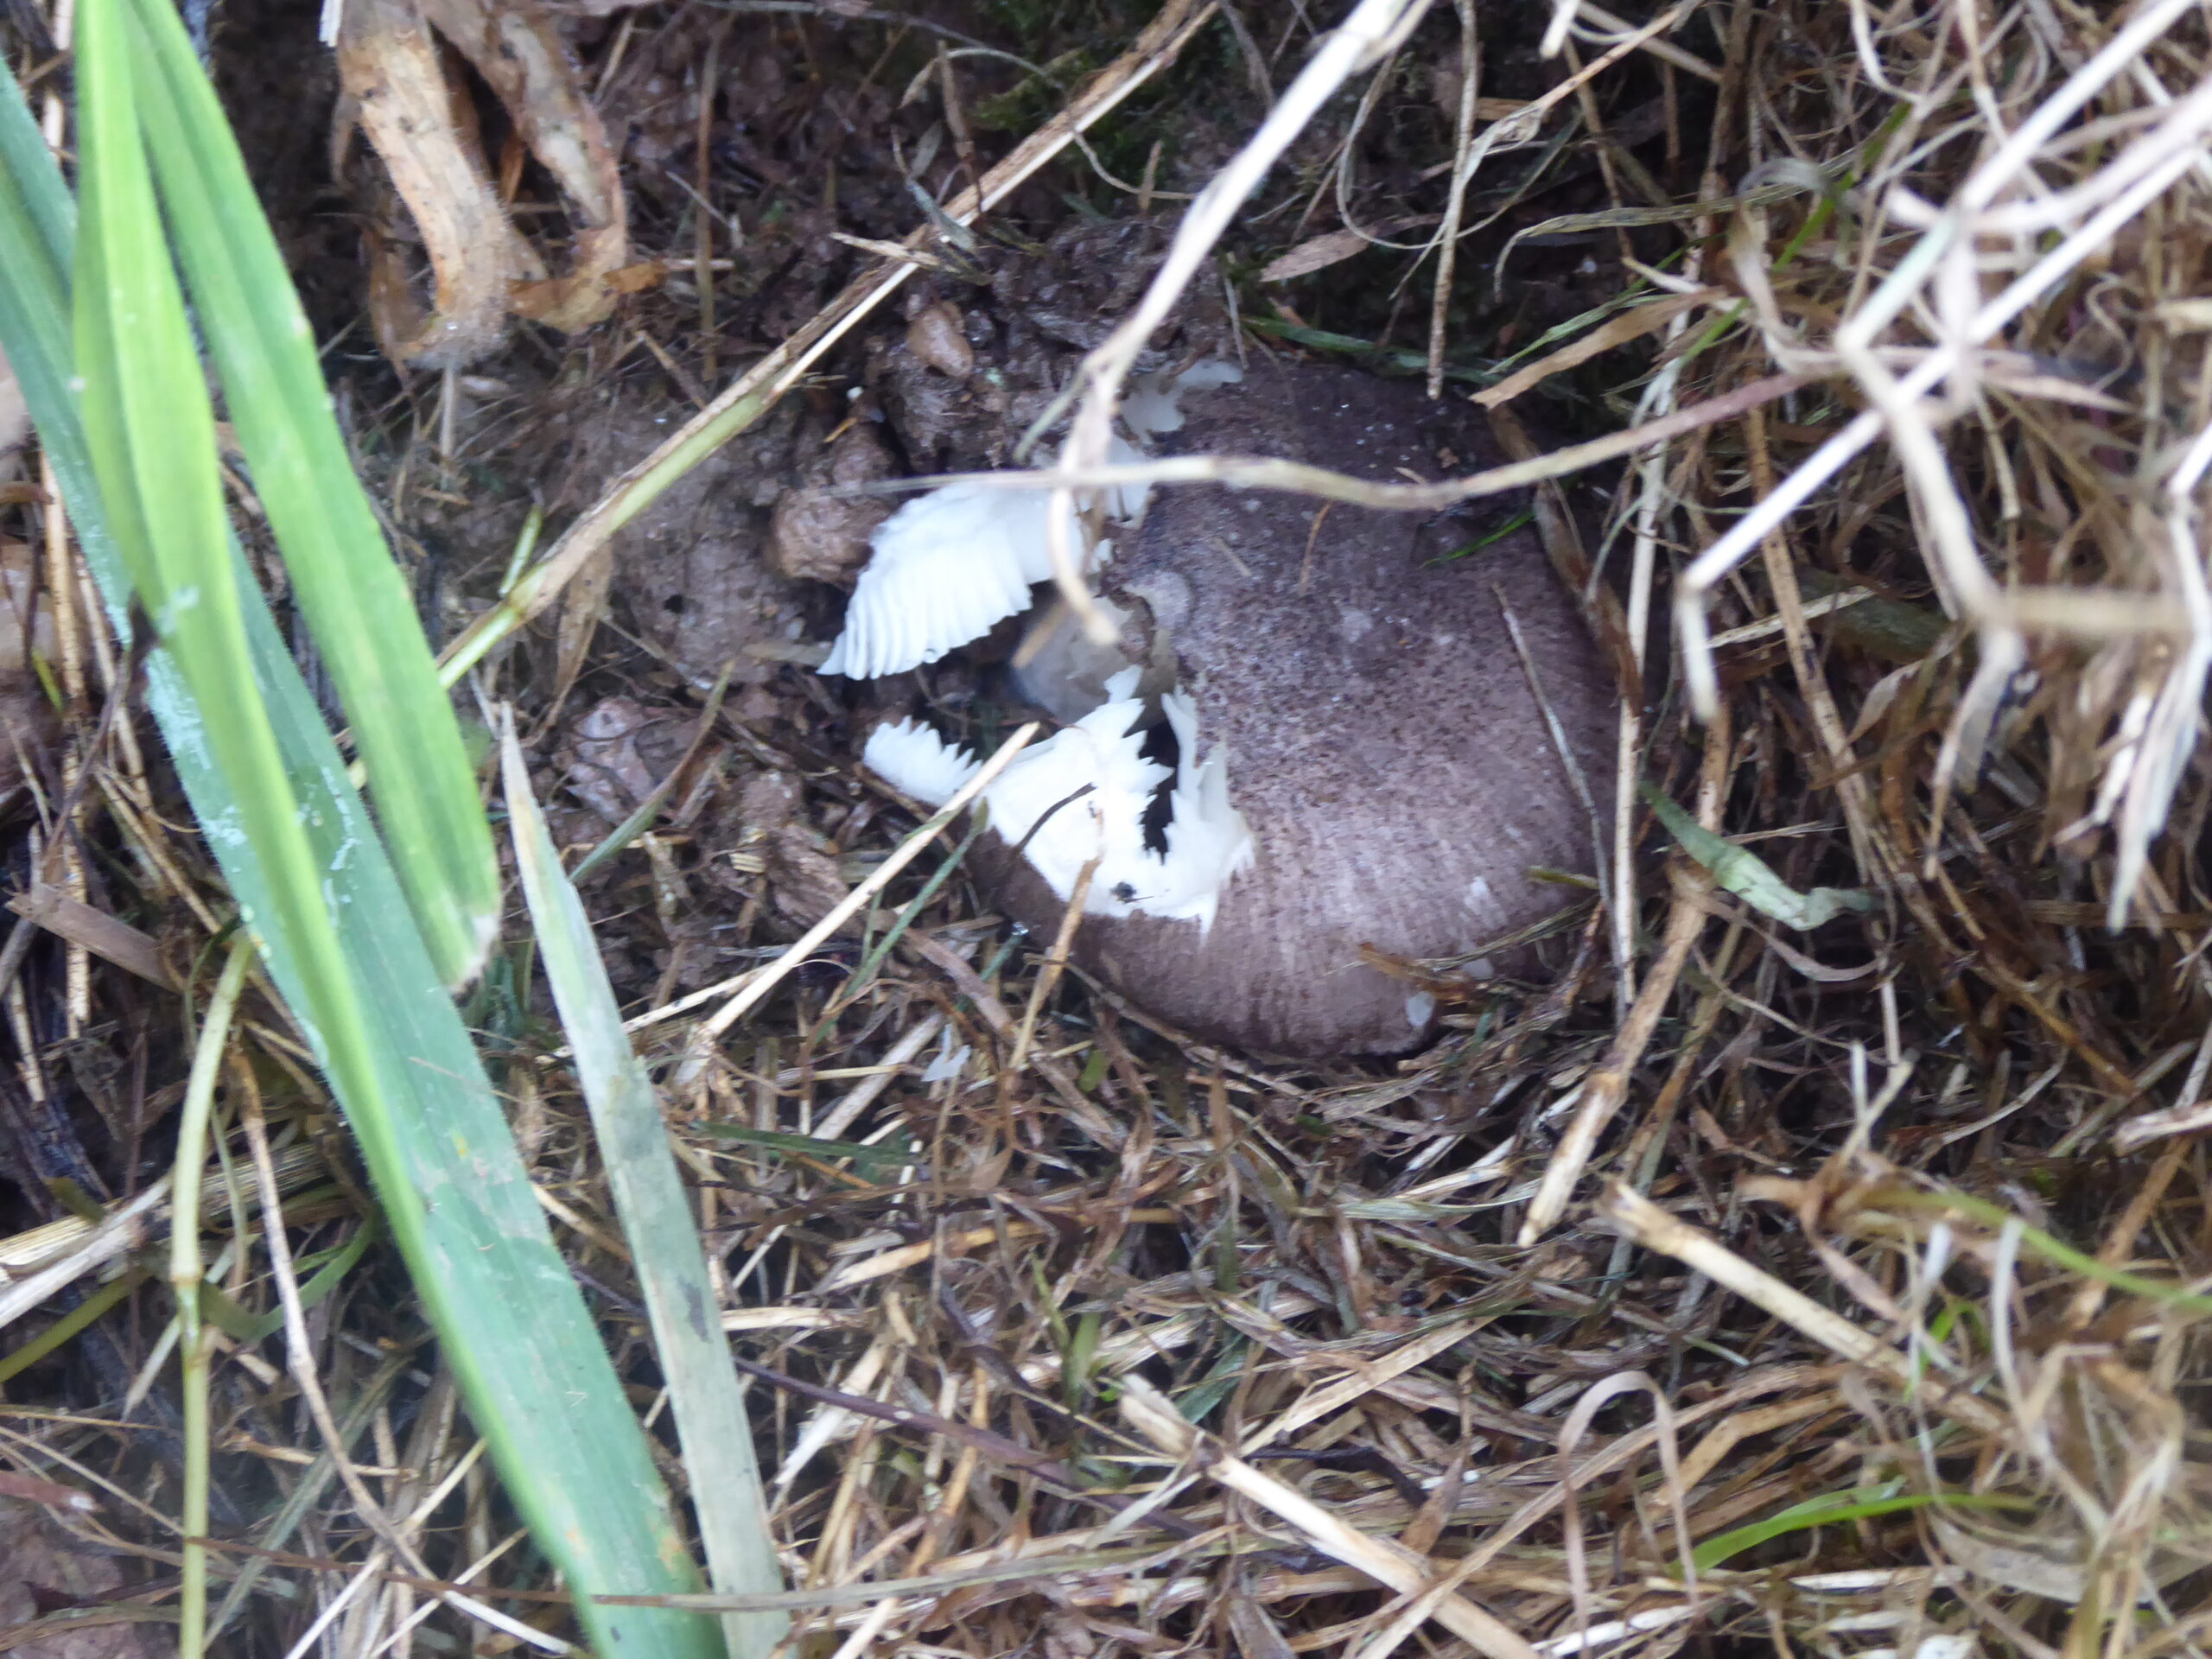 A Knight in the watermeadow – a Grey, Beech, or Ashen Knight (Tricholoma) Toadstool